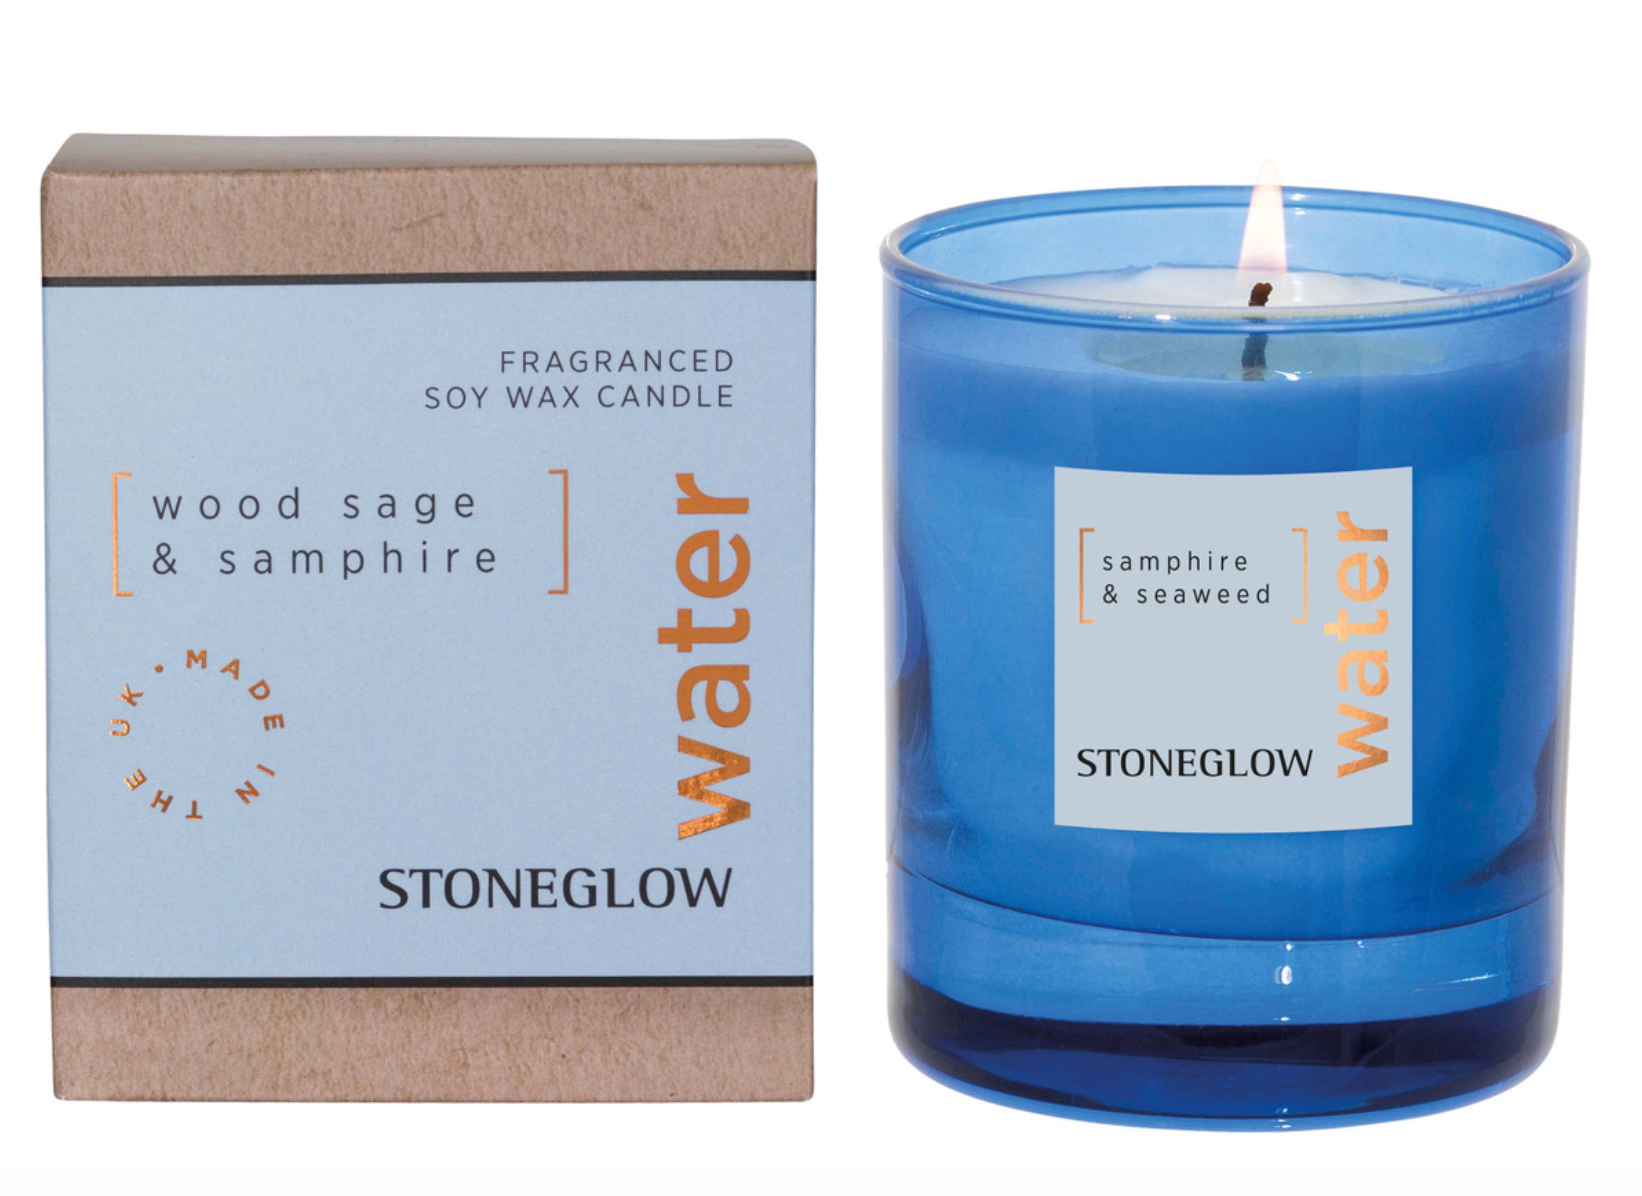 Elements Water: Wood sage and Samphire scented candle